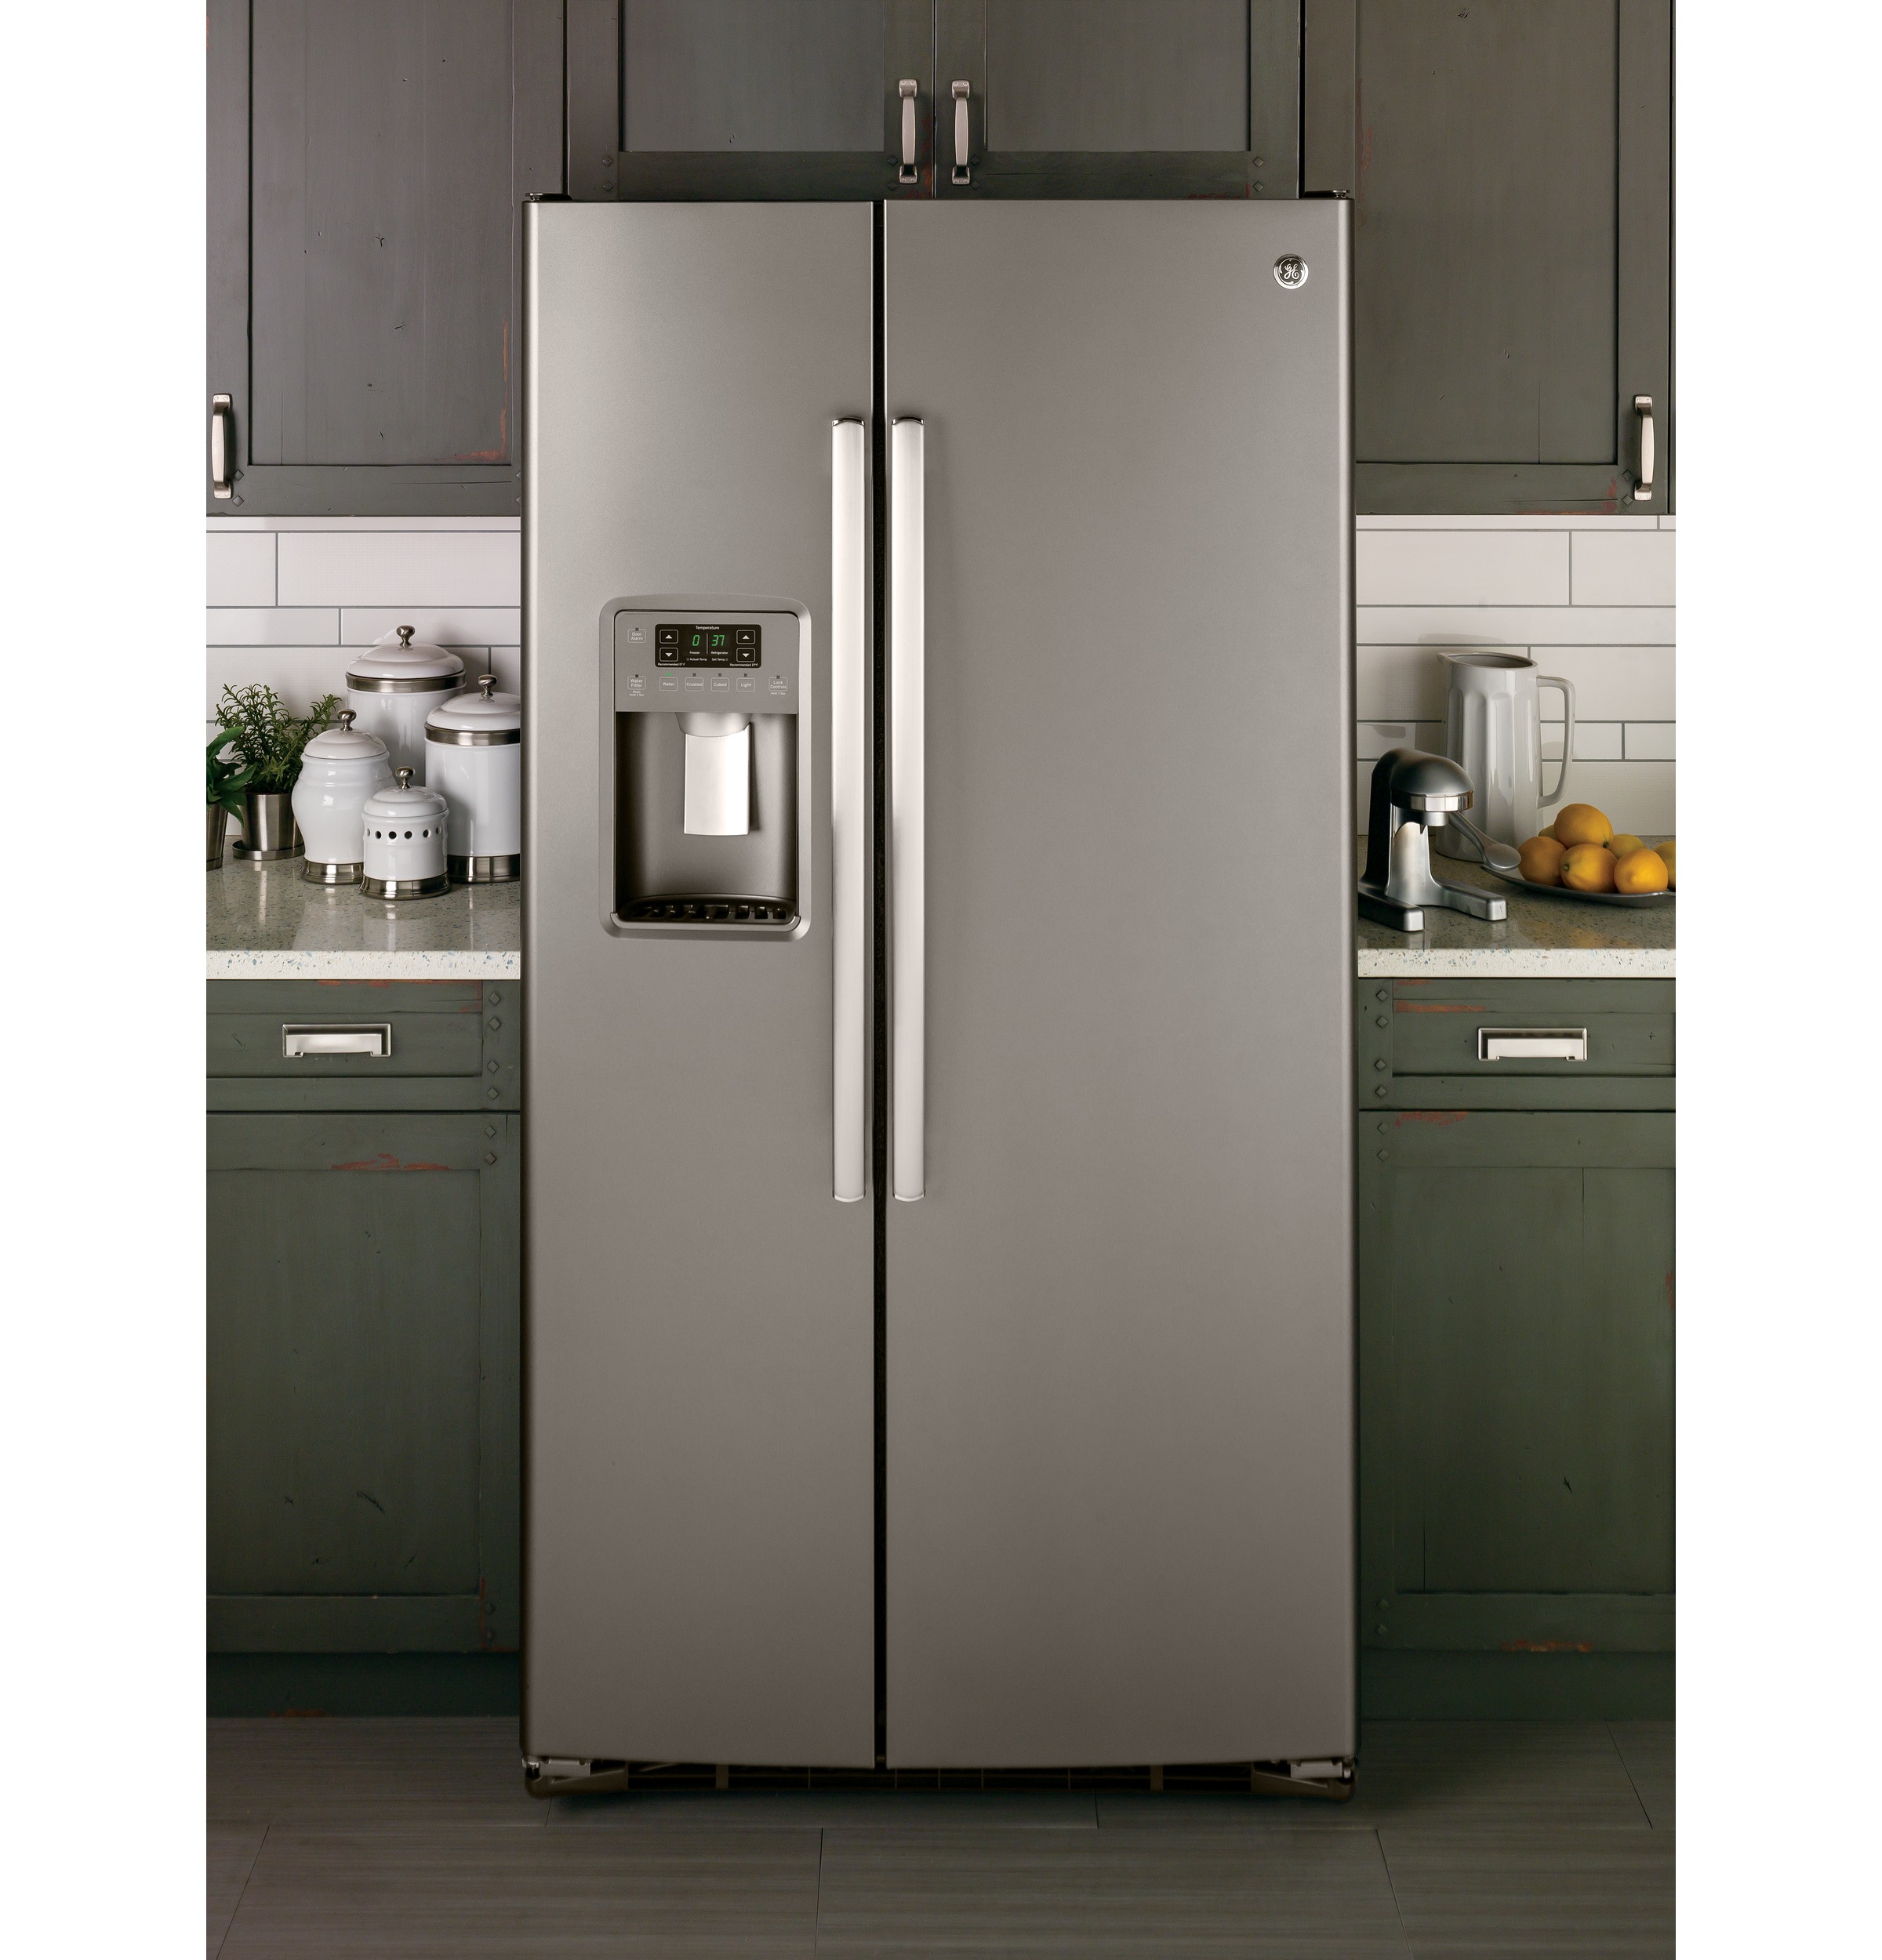 Why Is My GE Fridge Not Making Ice? – Press To Cook